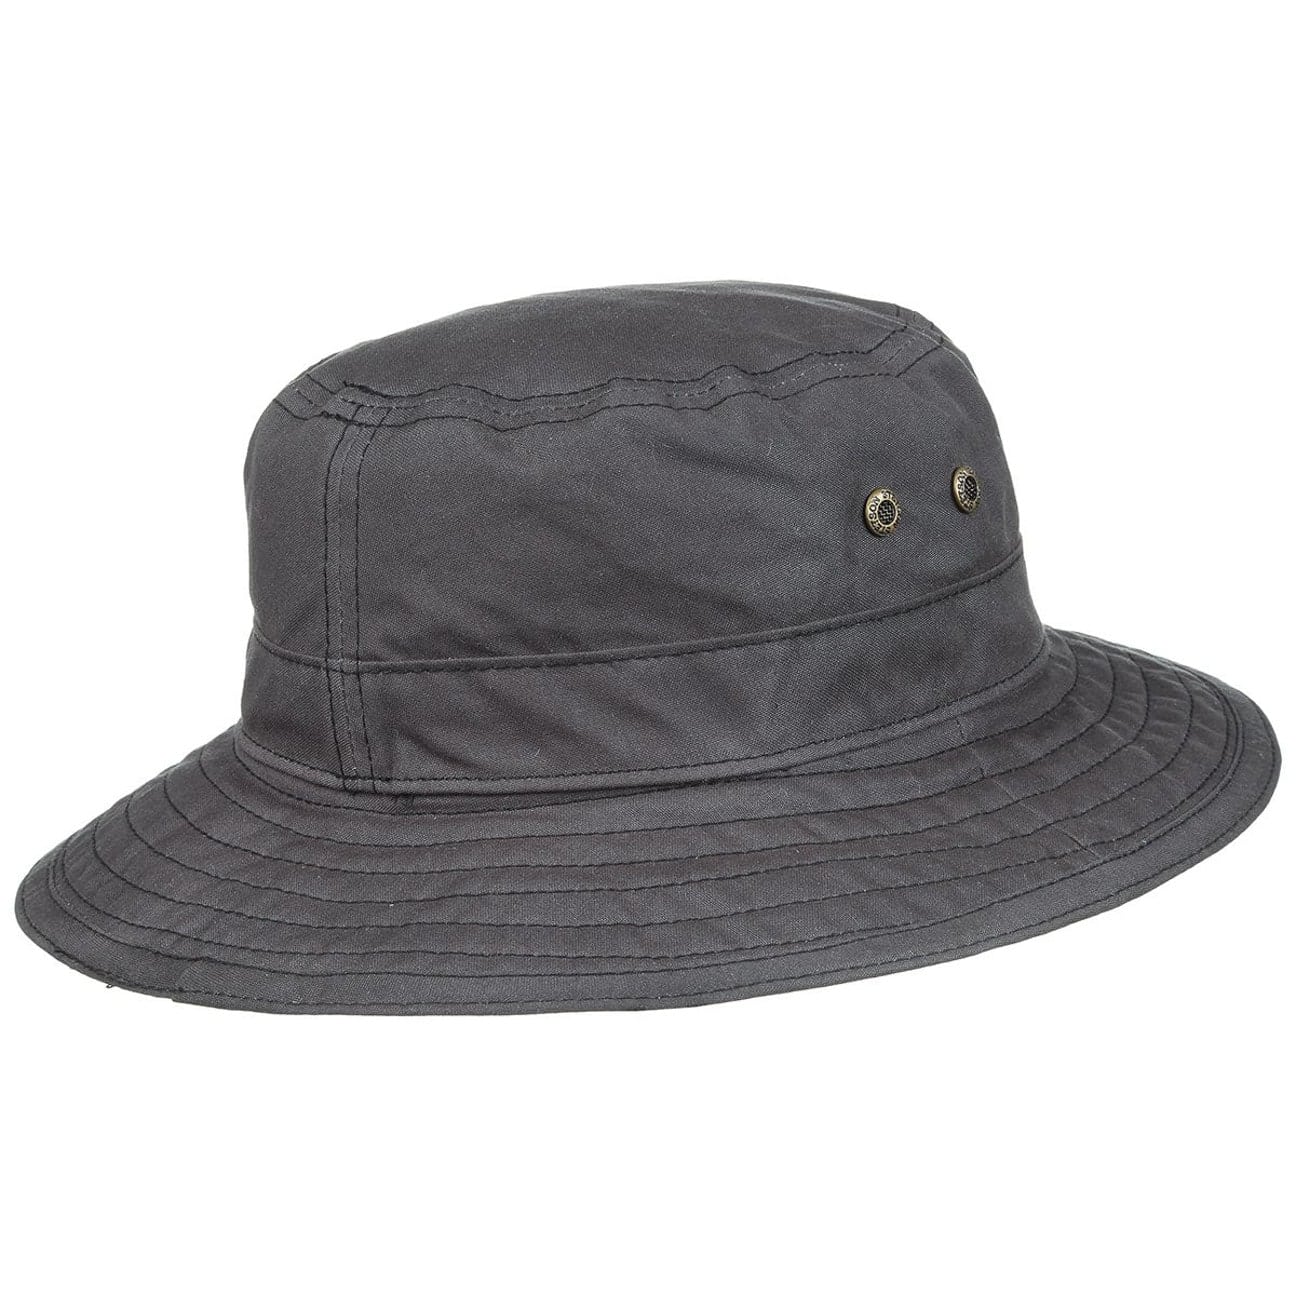 Atkins Waxed Cotton Bucket Hat by Stetson - 89,00